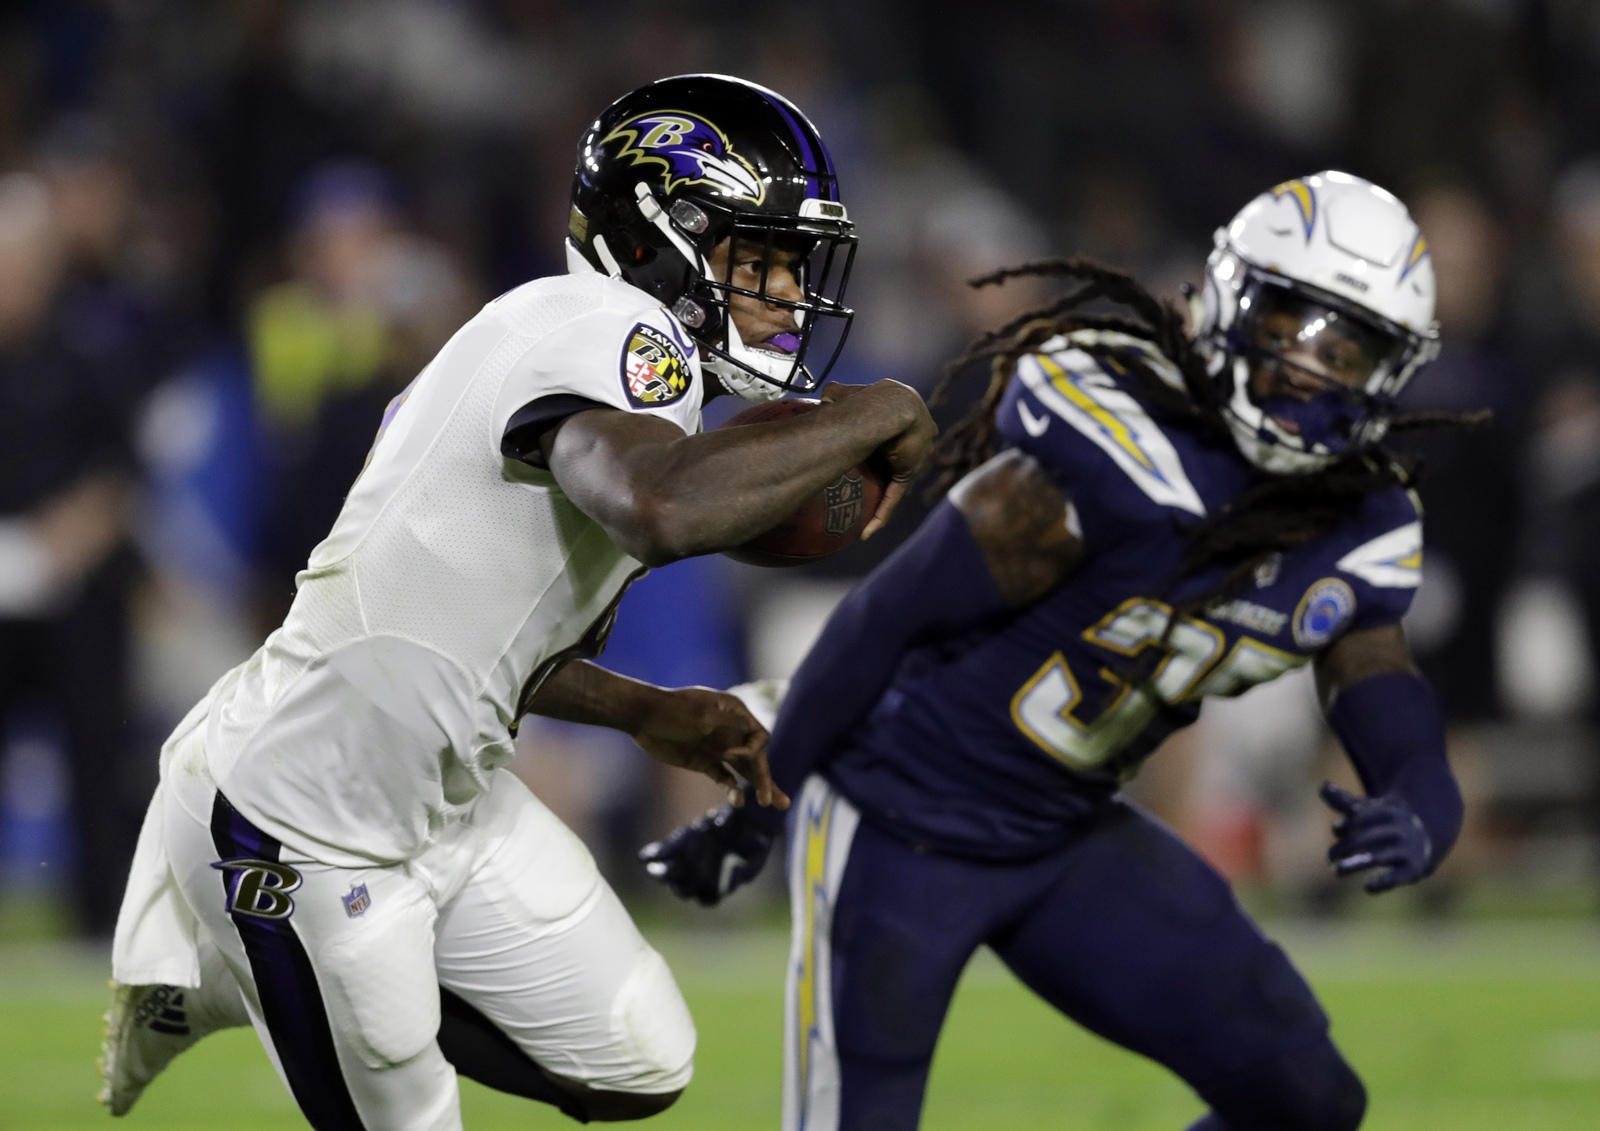 Chargers buscan revancha frente a Ravens